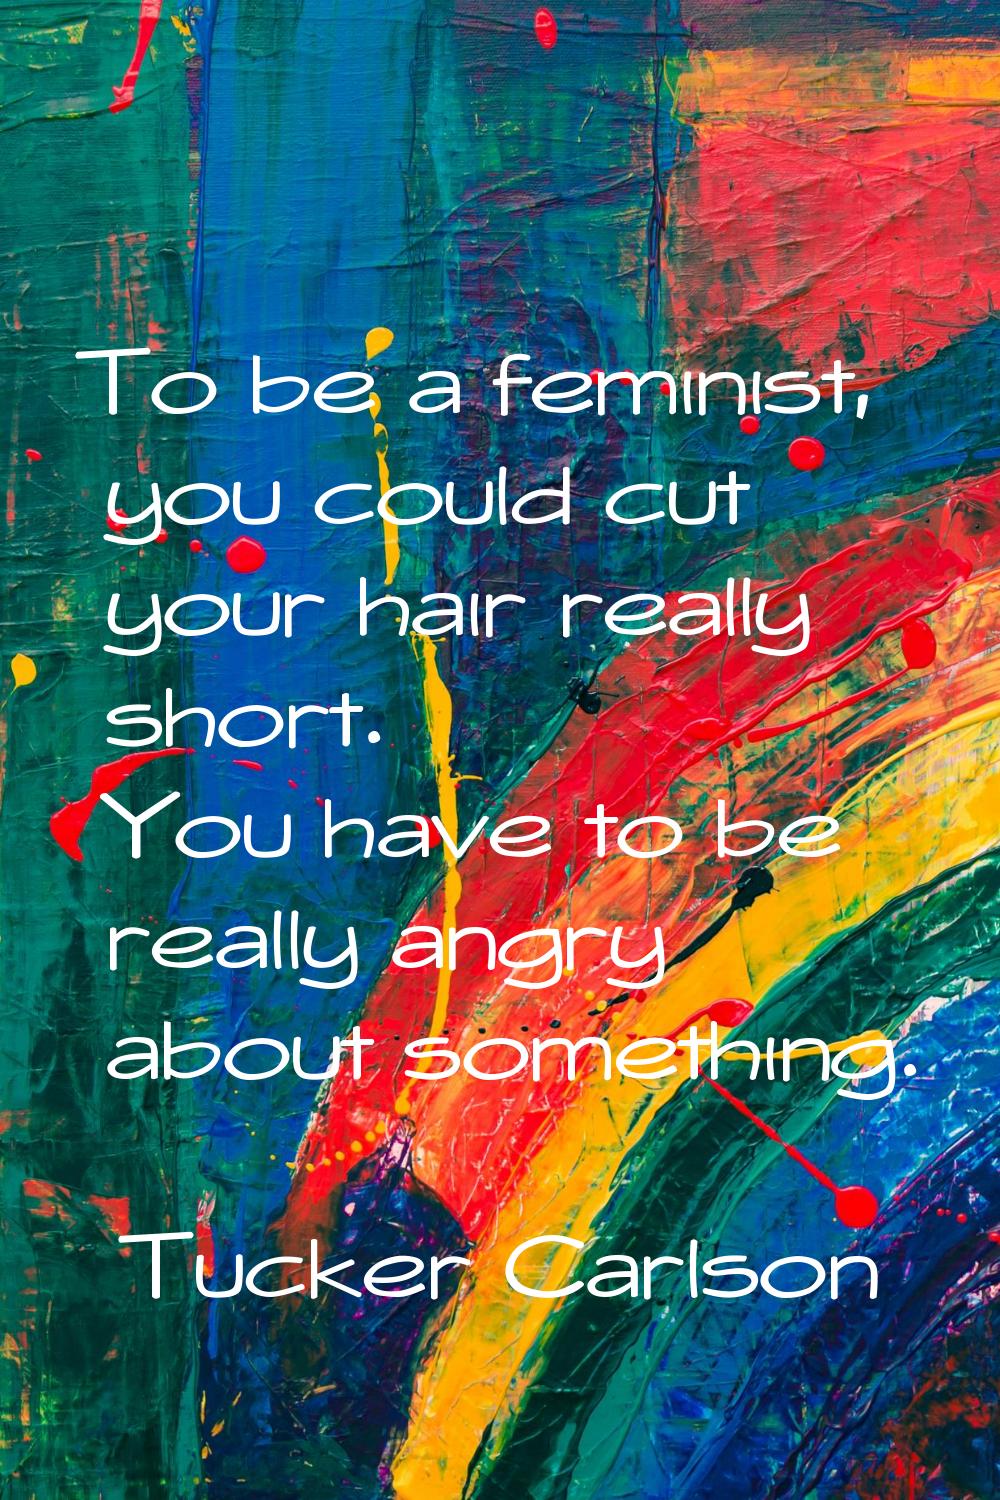 To be a feminist, you could cut your hair really short. You have to be really angry about something